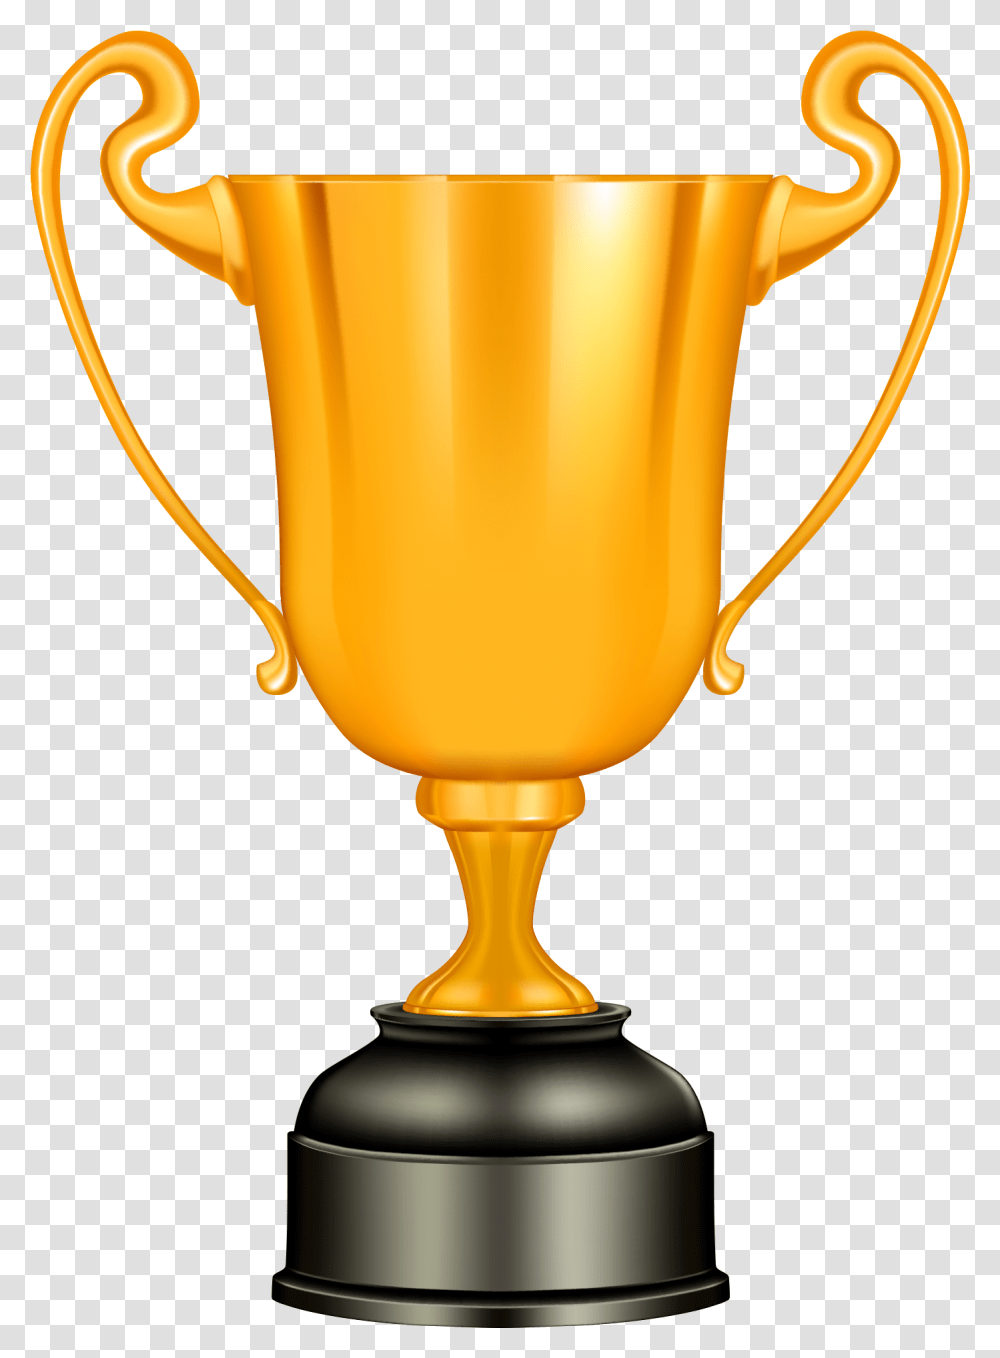 Award Trophy Clipart Silver Trophy Vector, Lamp Transparent Png